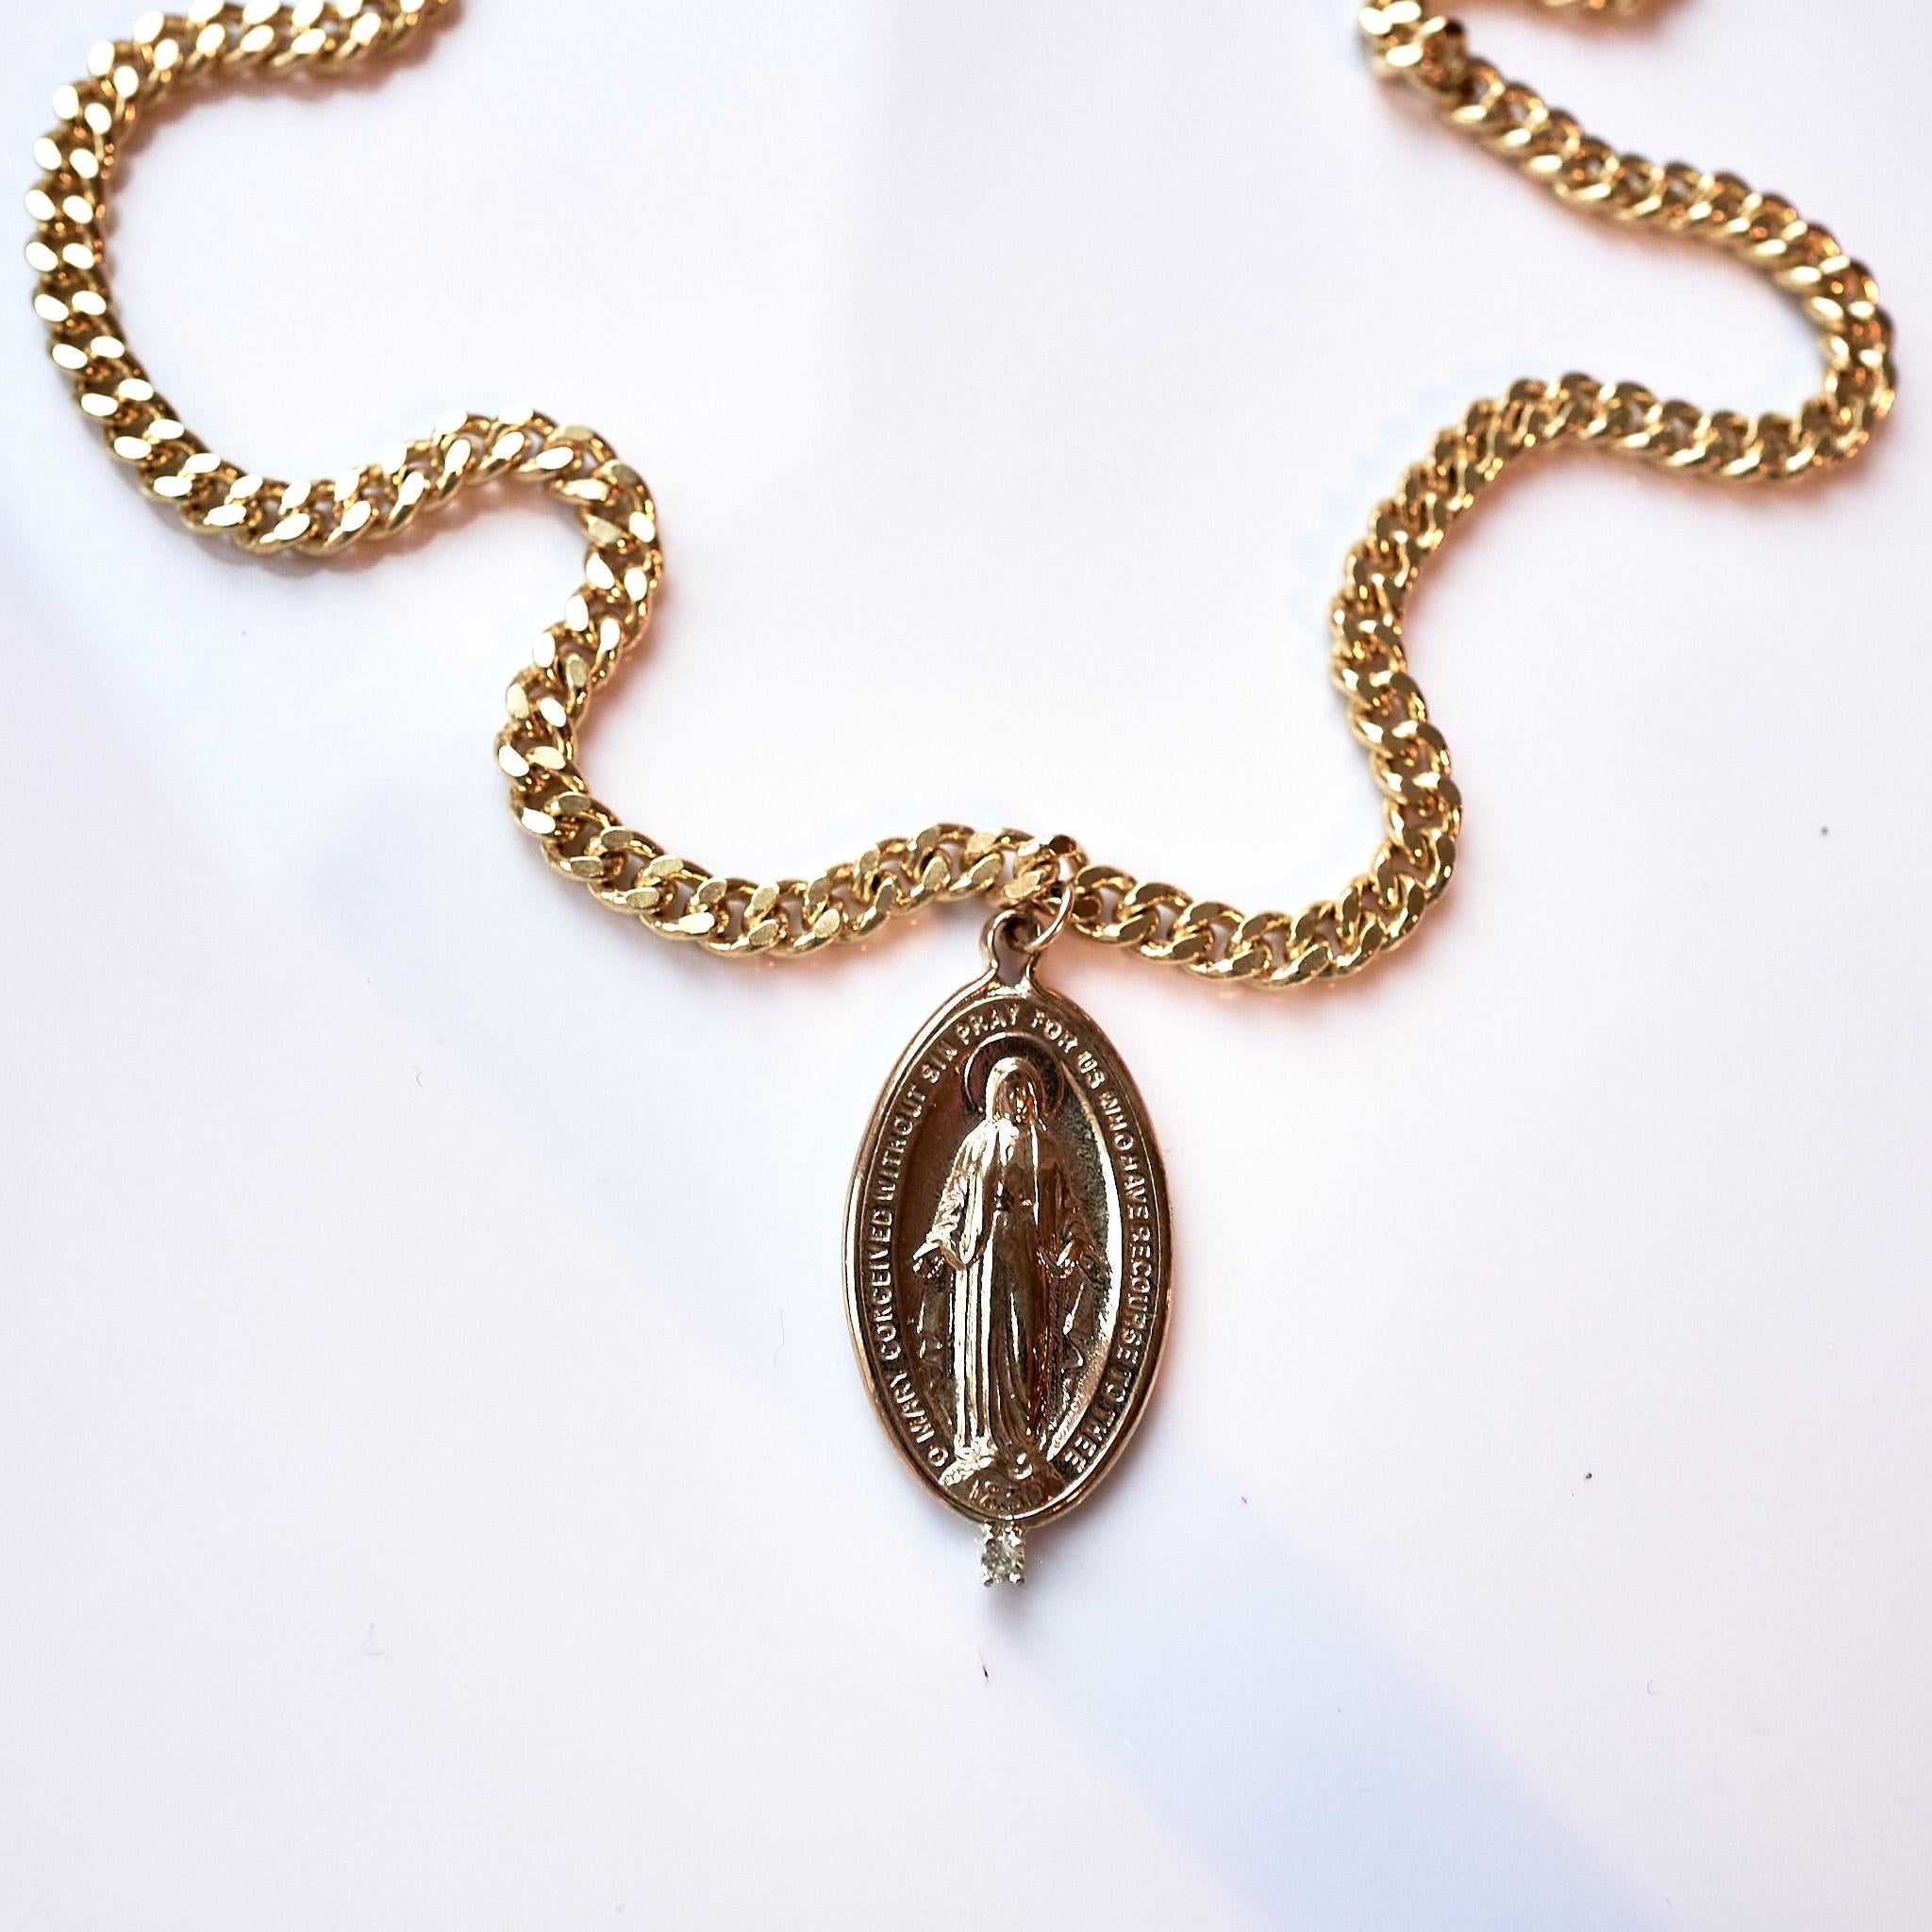 White Diamond Medal Virgin Mary Oval Medal Chain Necklace J Dauphin For Sale 6